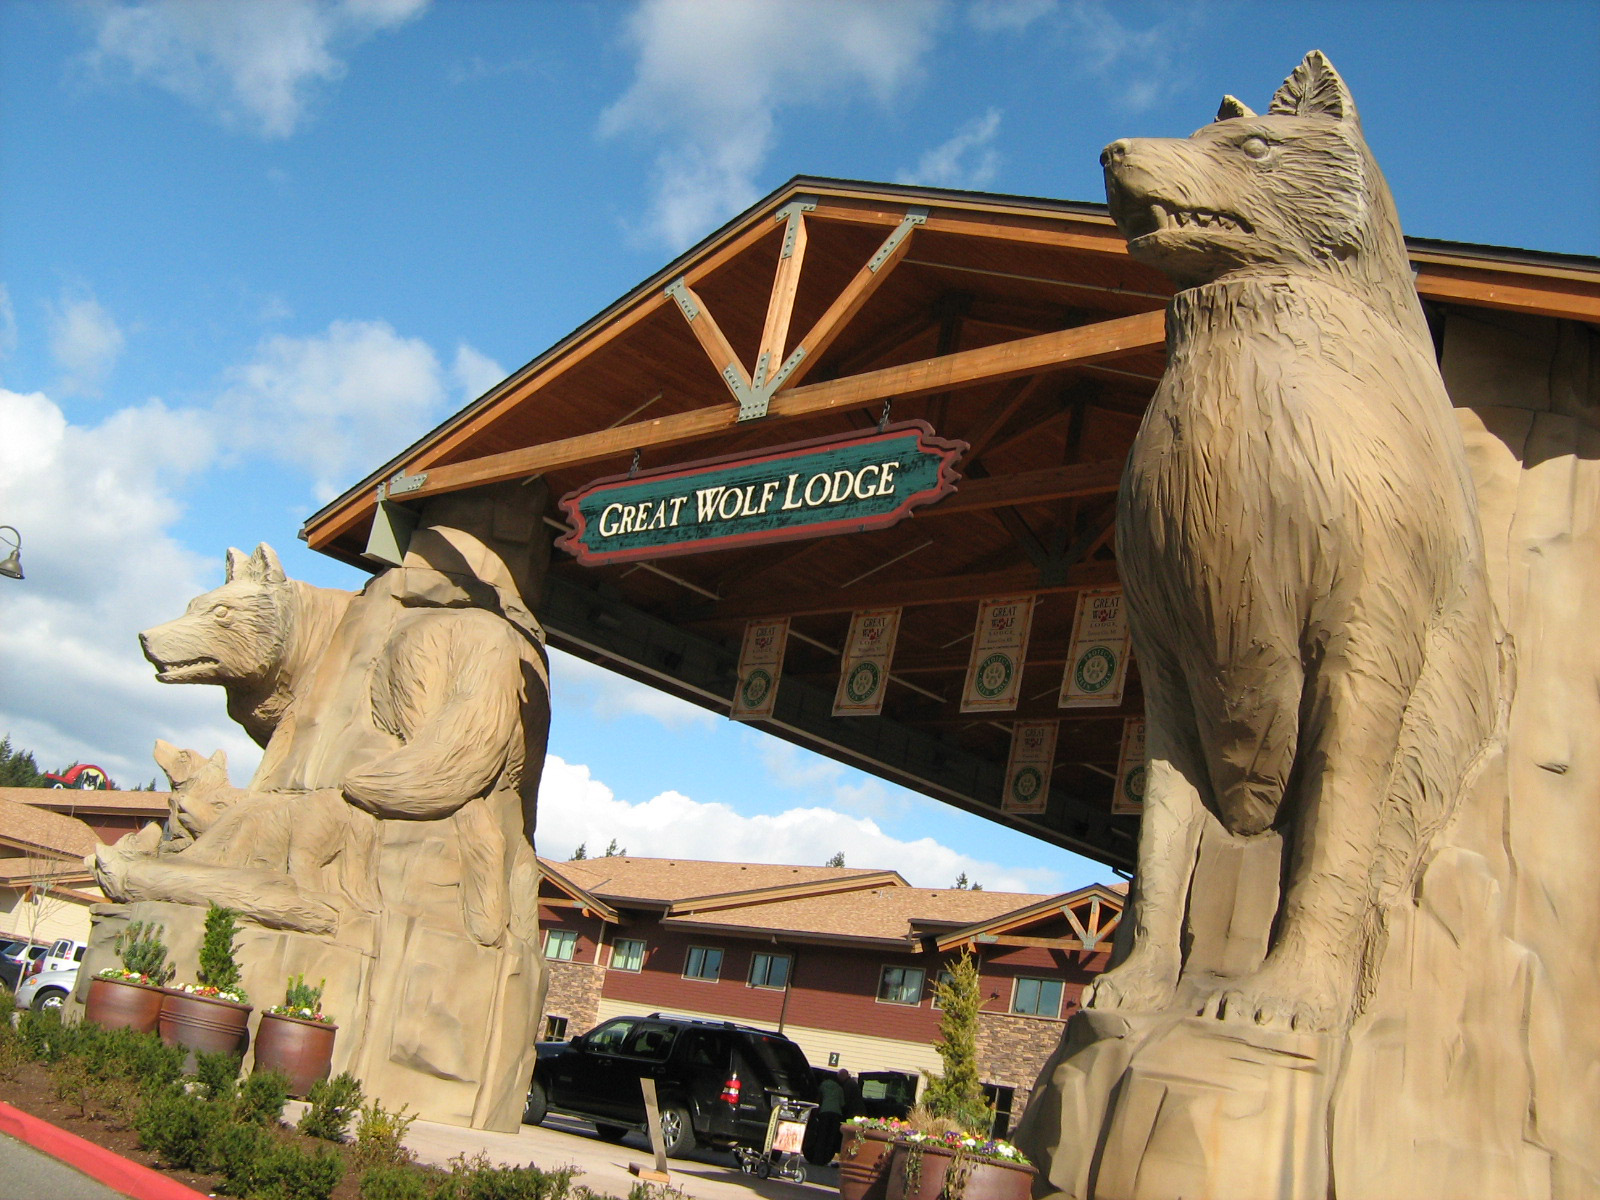 Free The Great Wolf Lodge Washington Water Park, Computer Wolf Lodge Owl